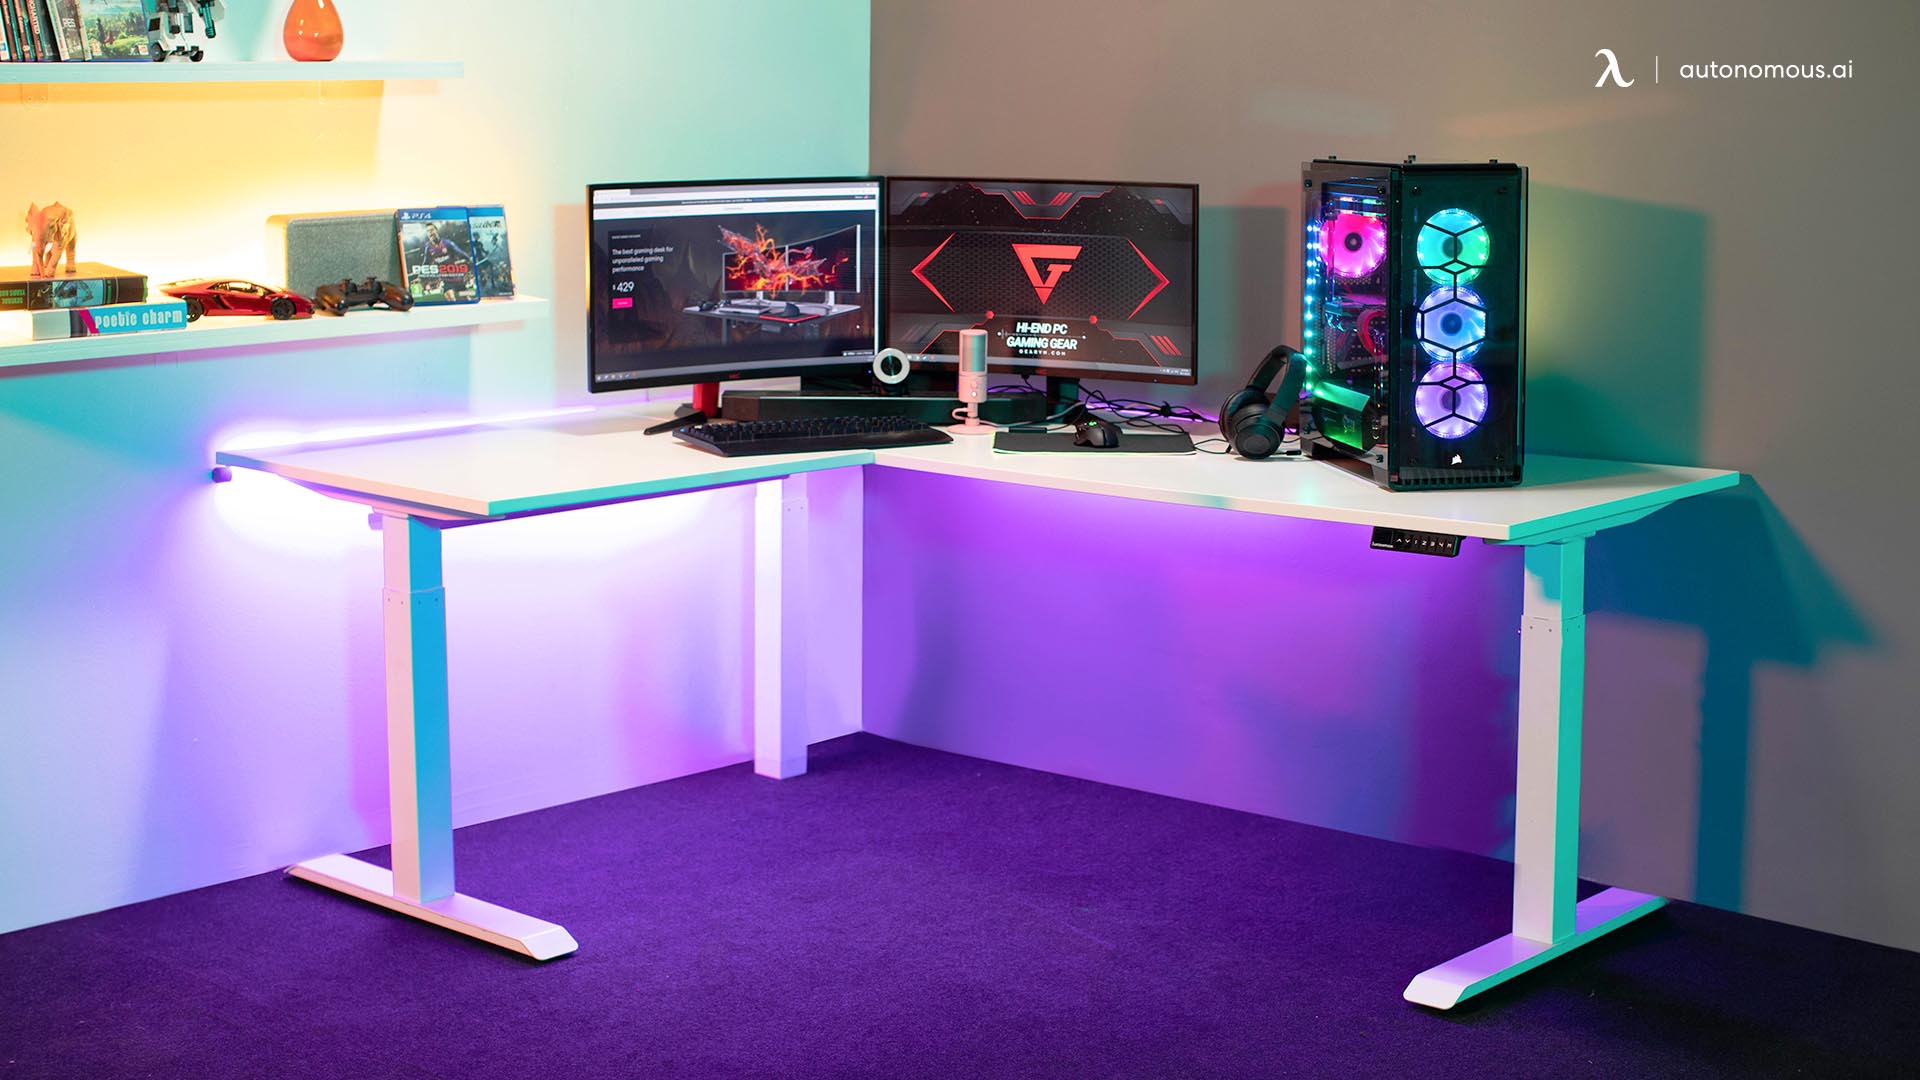 The 5 Best Monitors For Dual Setup Of 2022 [Buyer’s Guide]